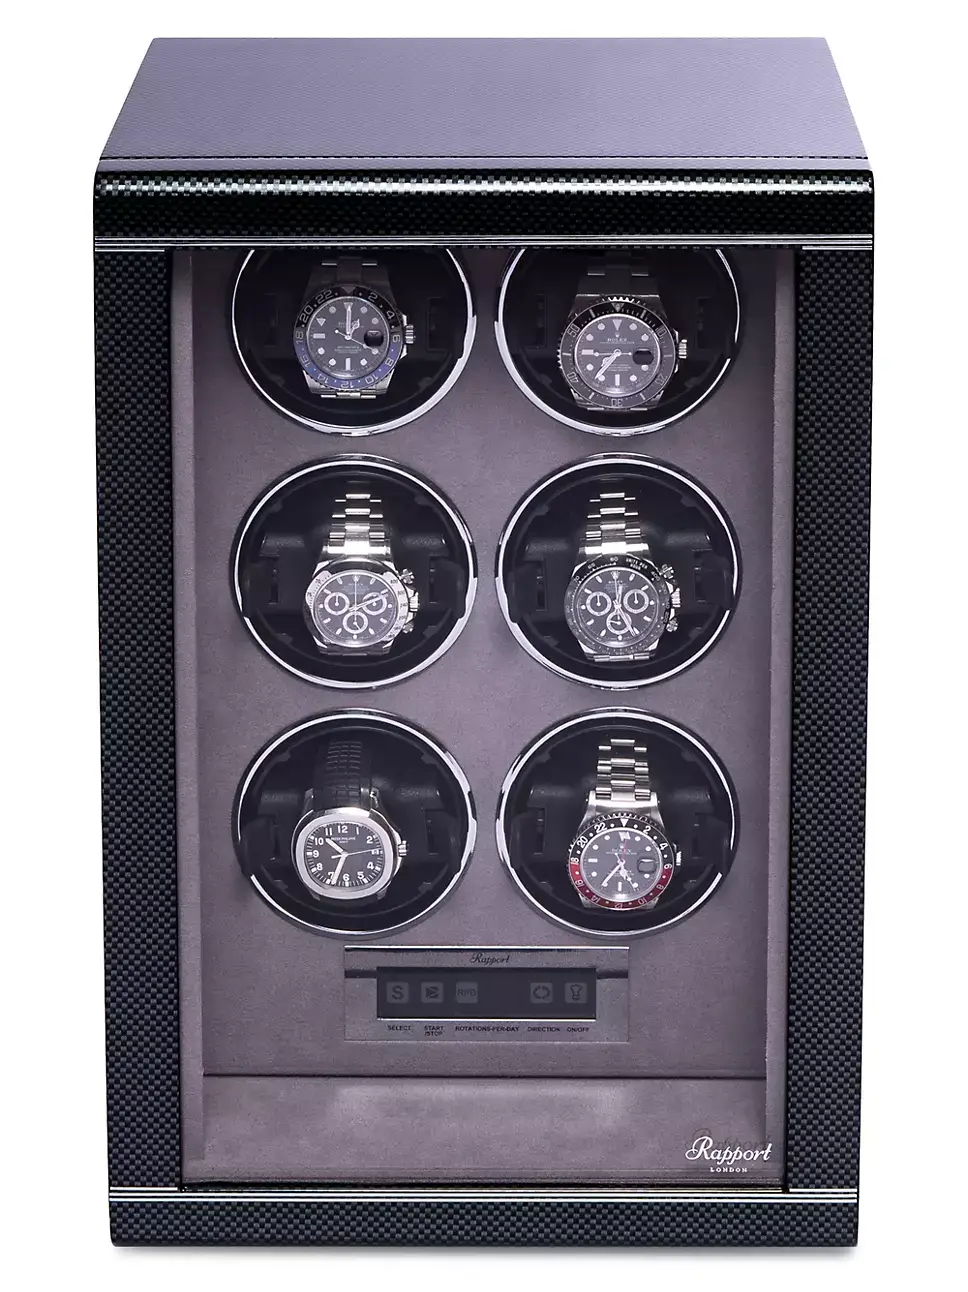 A black Rapport watch winder box displaying six luxury watches through a transparent glass door.